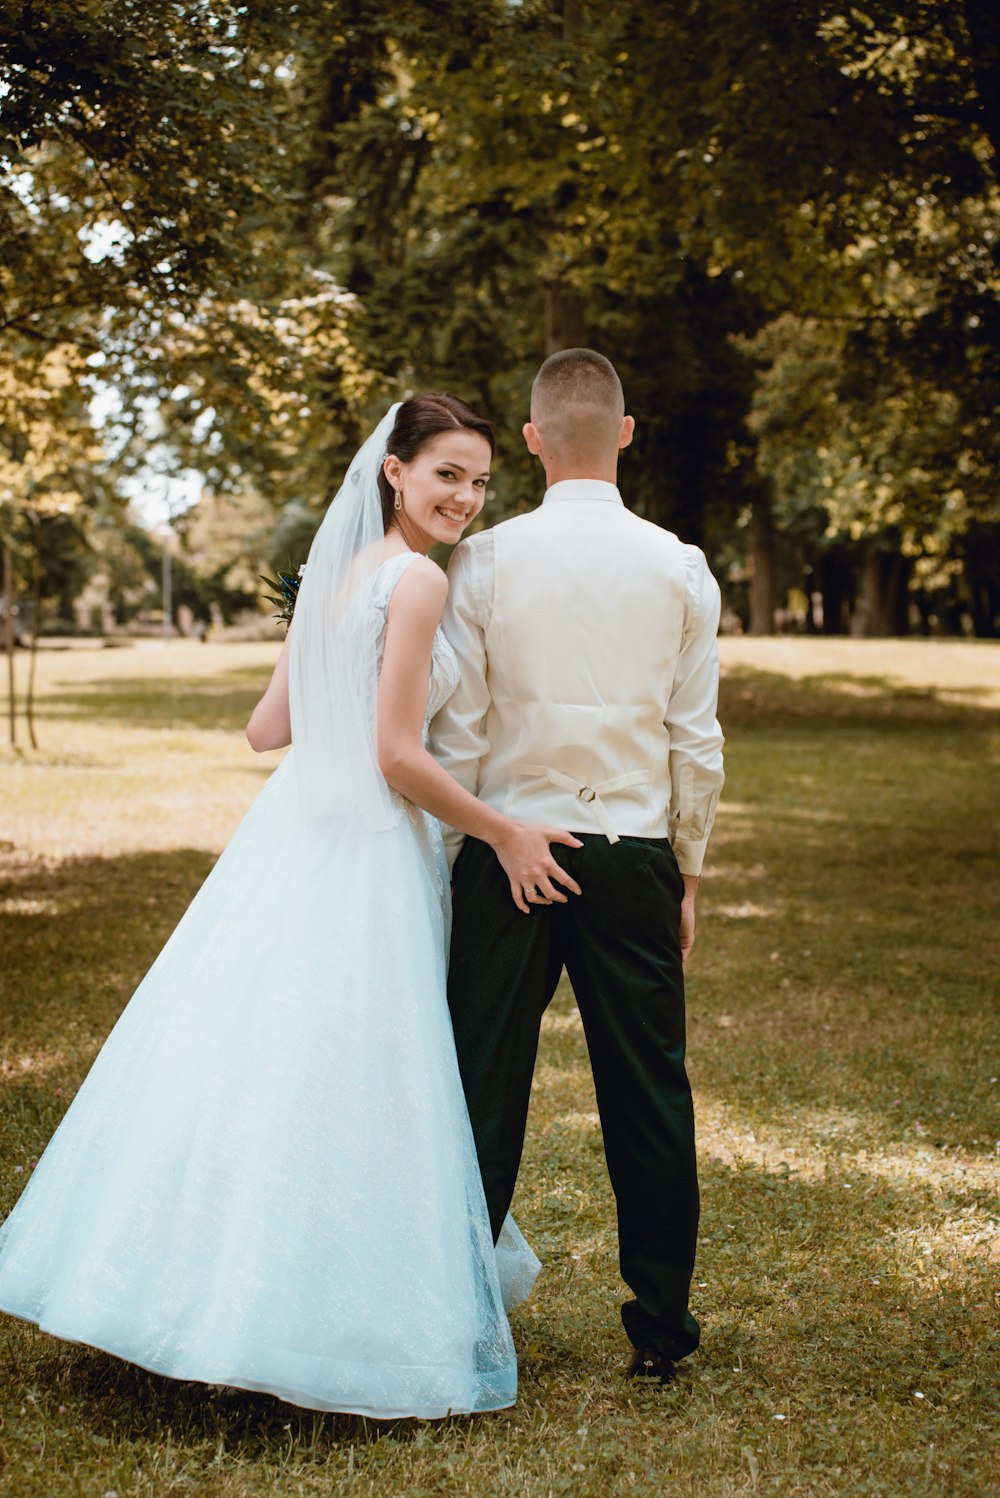 Man in white dress shirt and black pants holding woman in white wedding  dress photo – Free Apparel Image on Unsplash